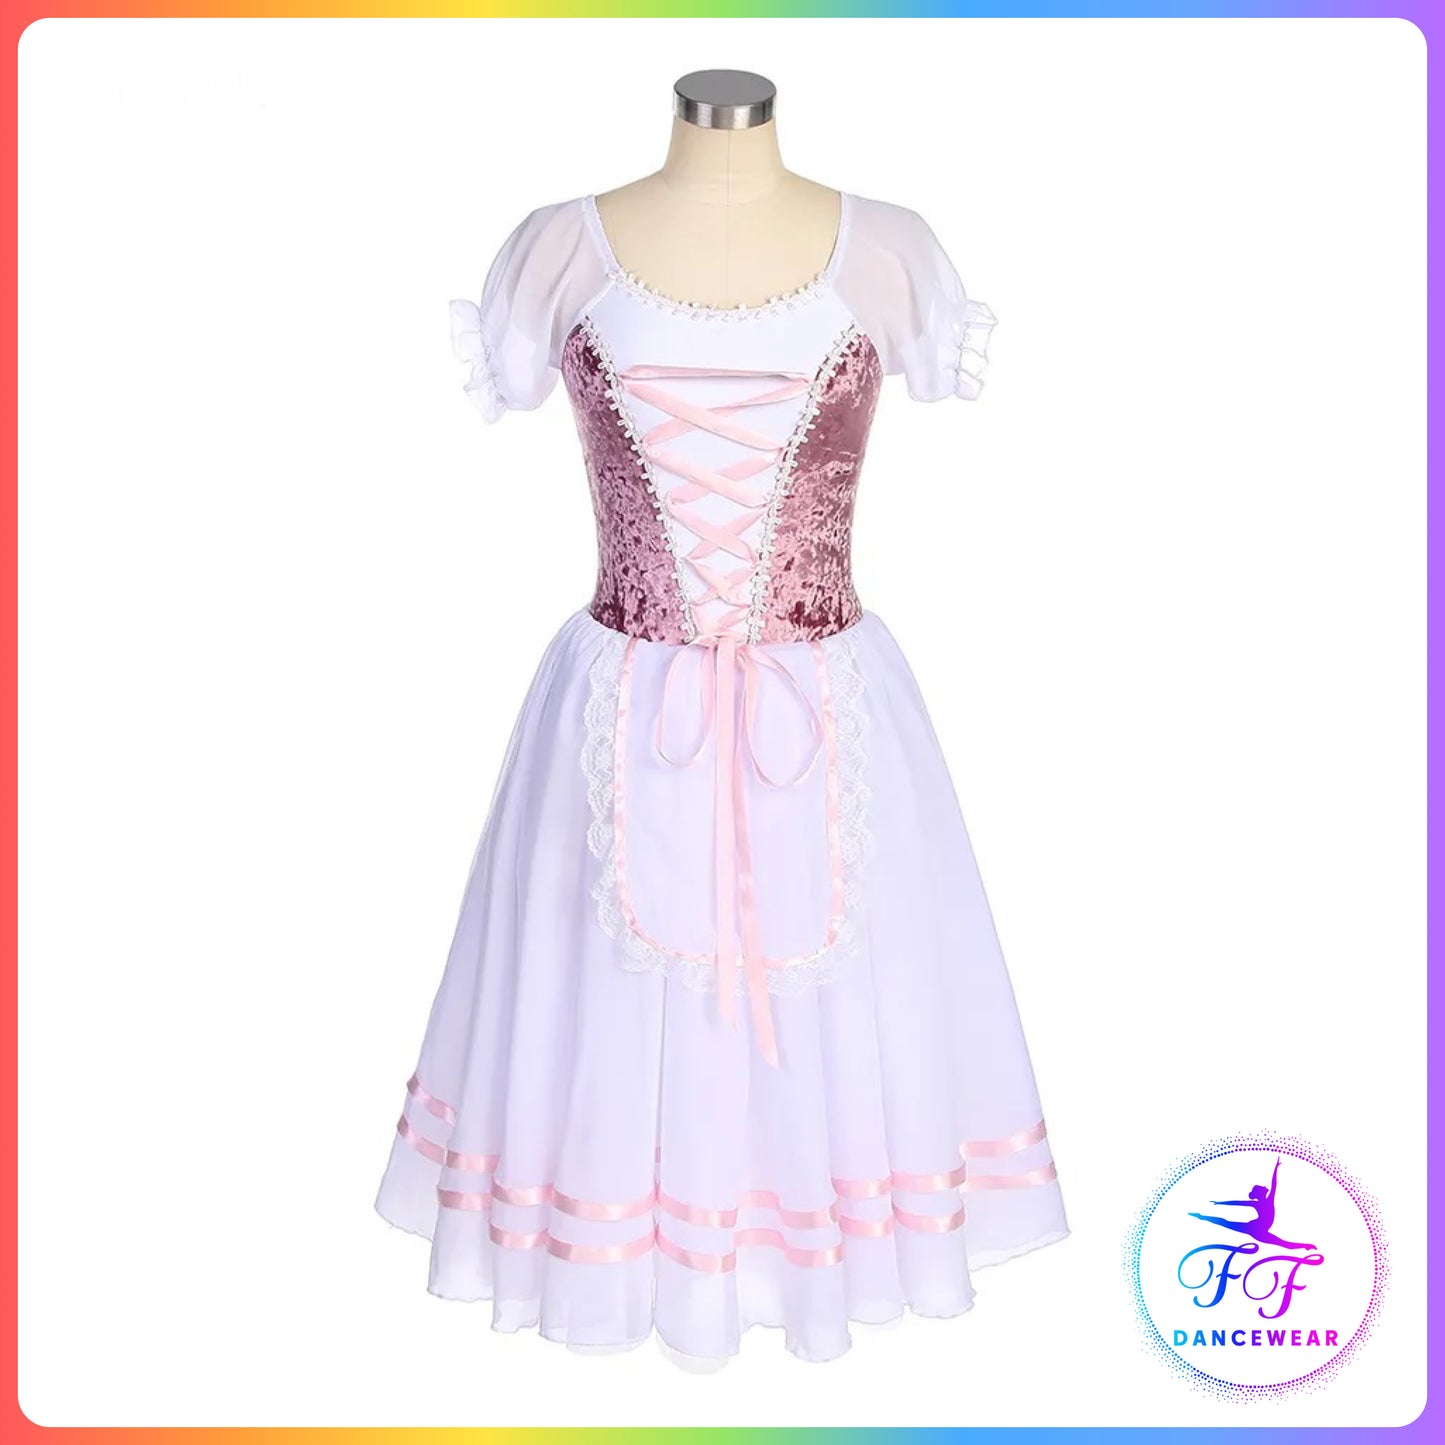 Pink & White Puff Sleeve Ballet Dress (Child & Adult Sizes)